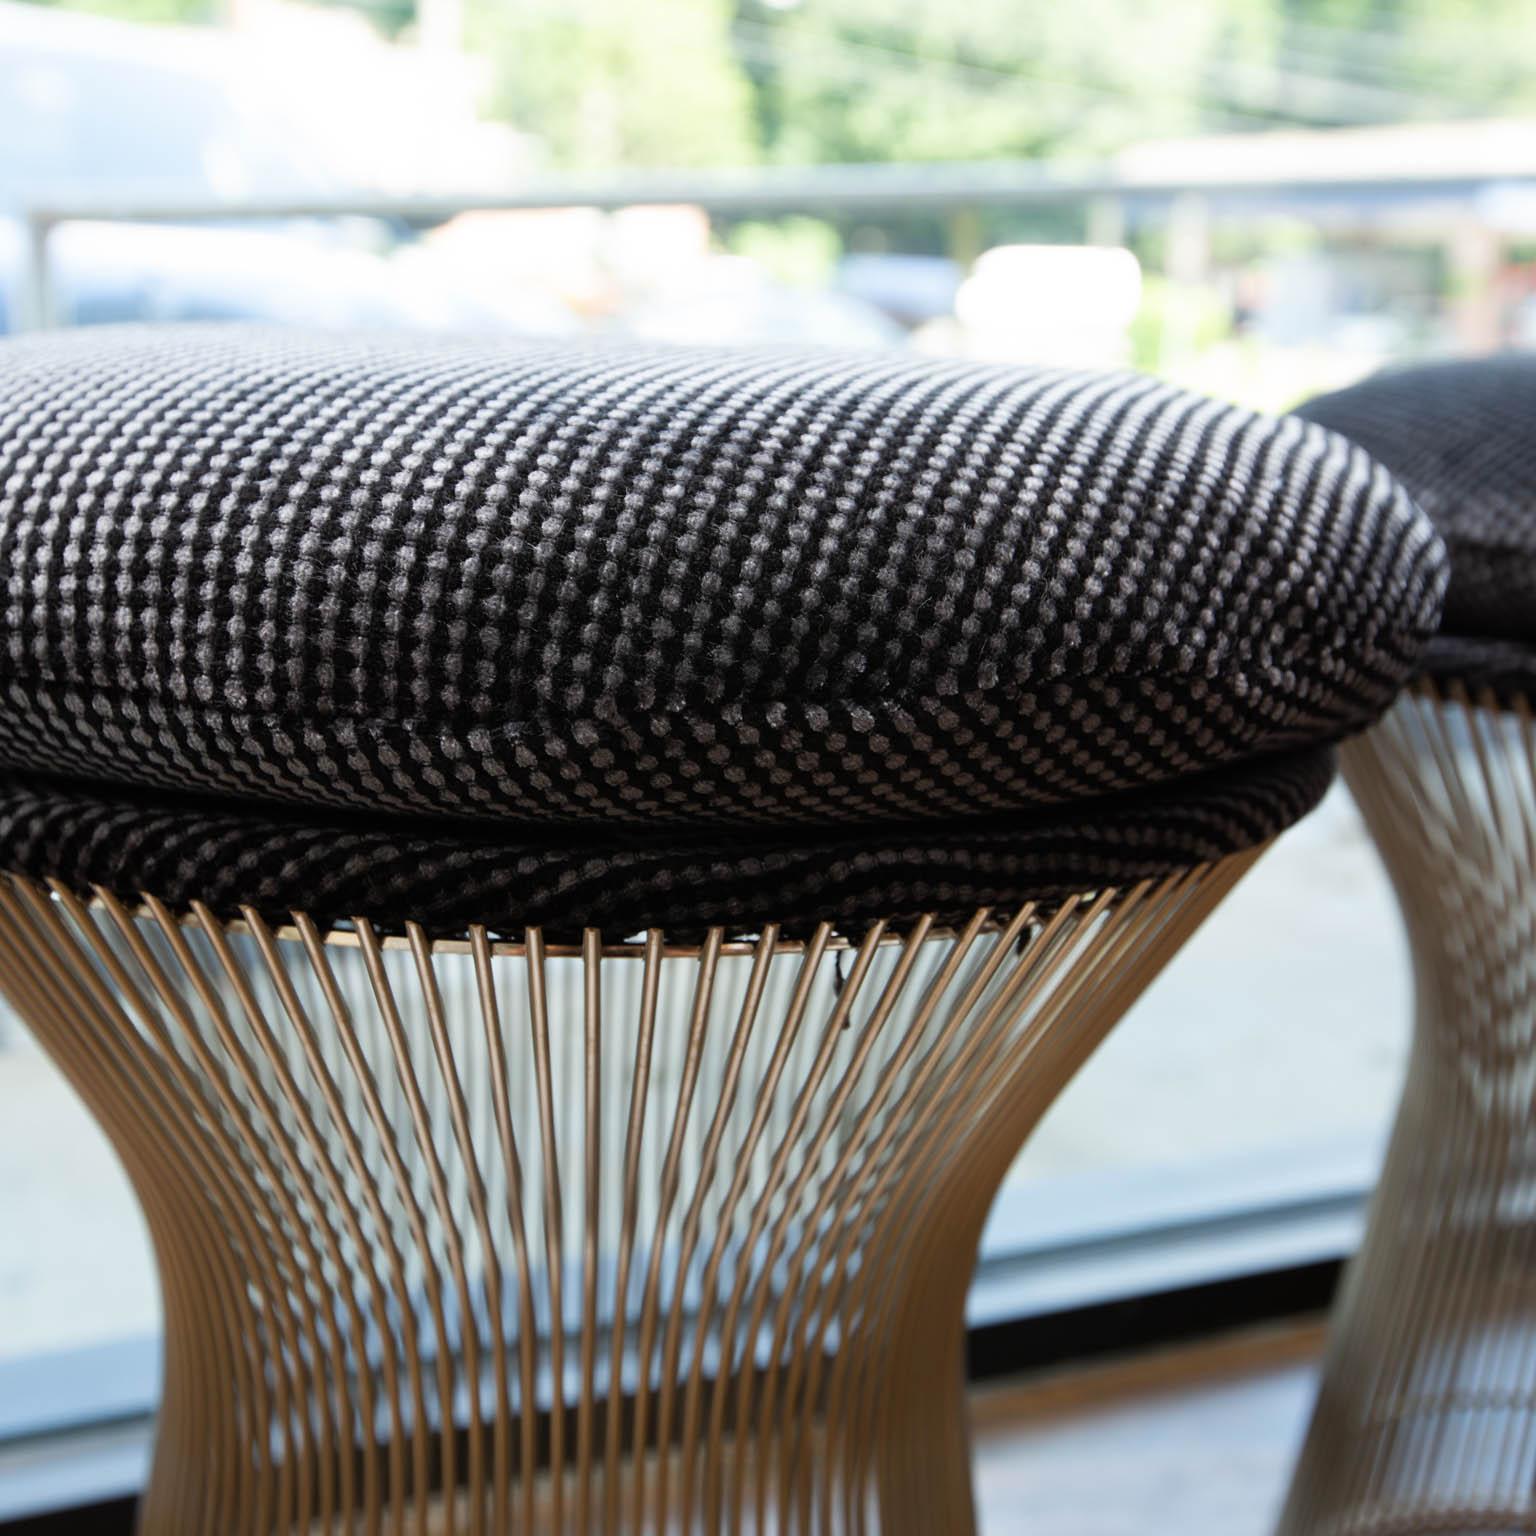 Knoll stainless steel wire stools that have been refinished in a black and grey linear dotted wool fabric.